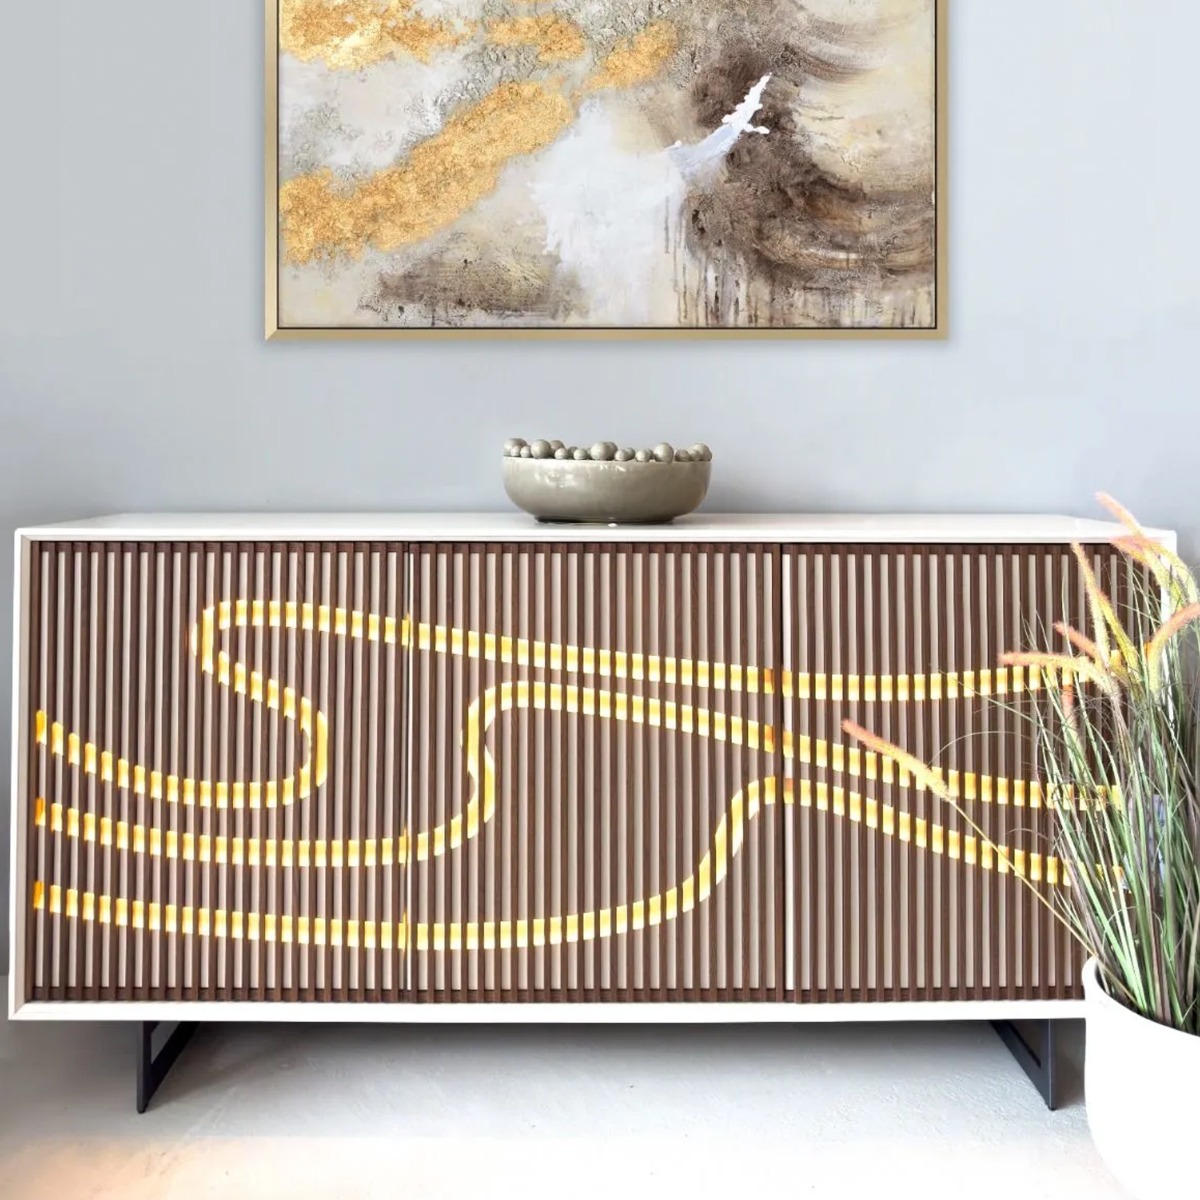 dark wood slatted sideboard with swirling LED pattern, accessorised with a glossy ceramic grey bobble bowl and an abstract gold artwork behind the sideboard